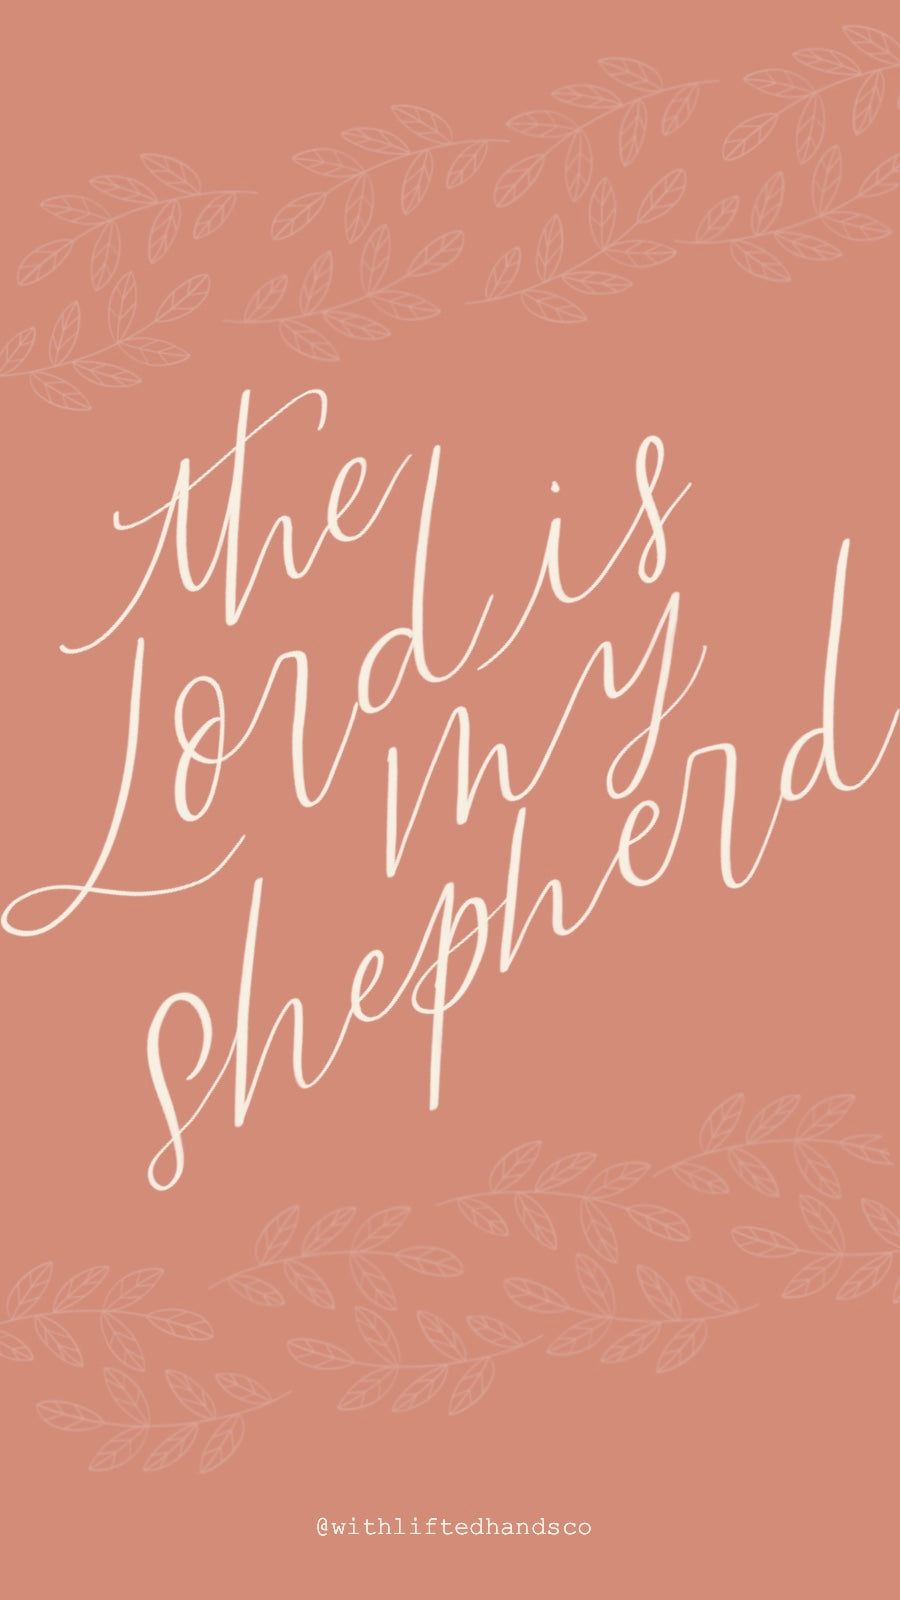 The lord is my shepherd bible verse lettering